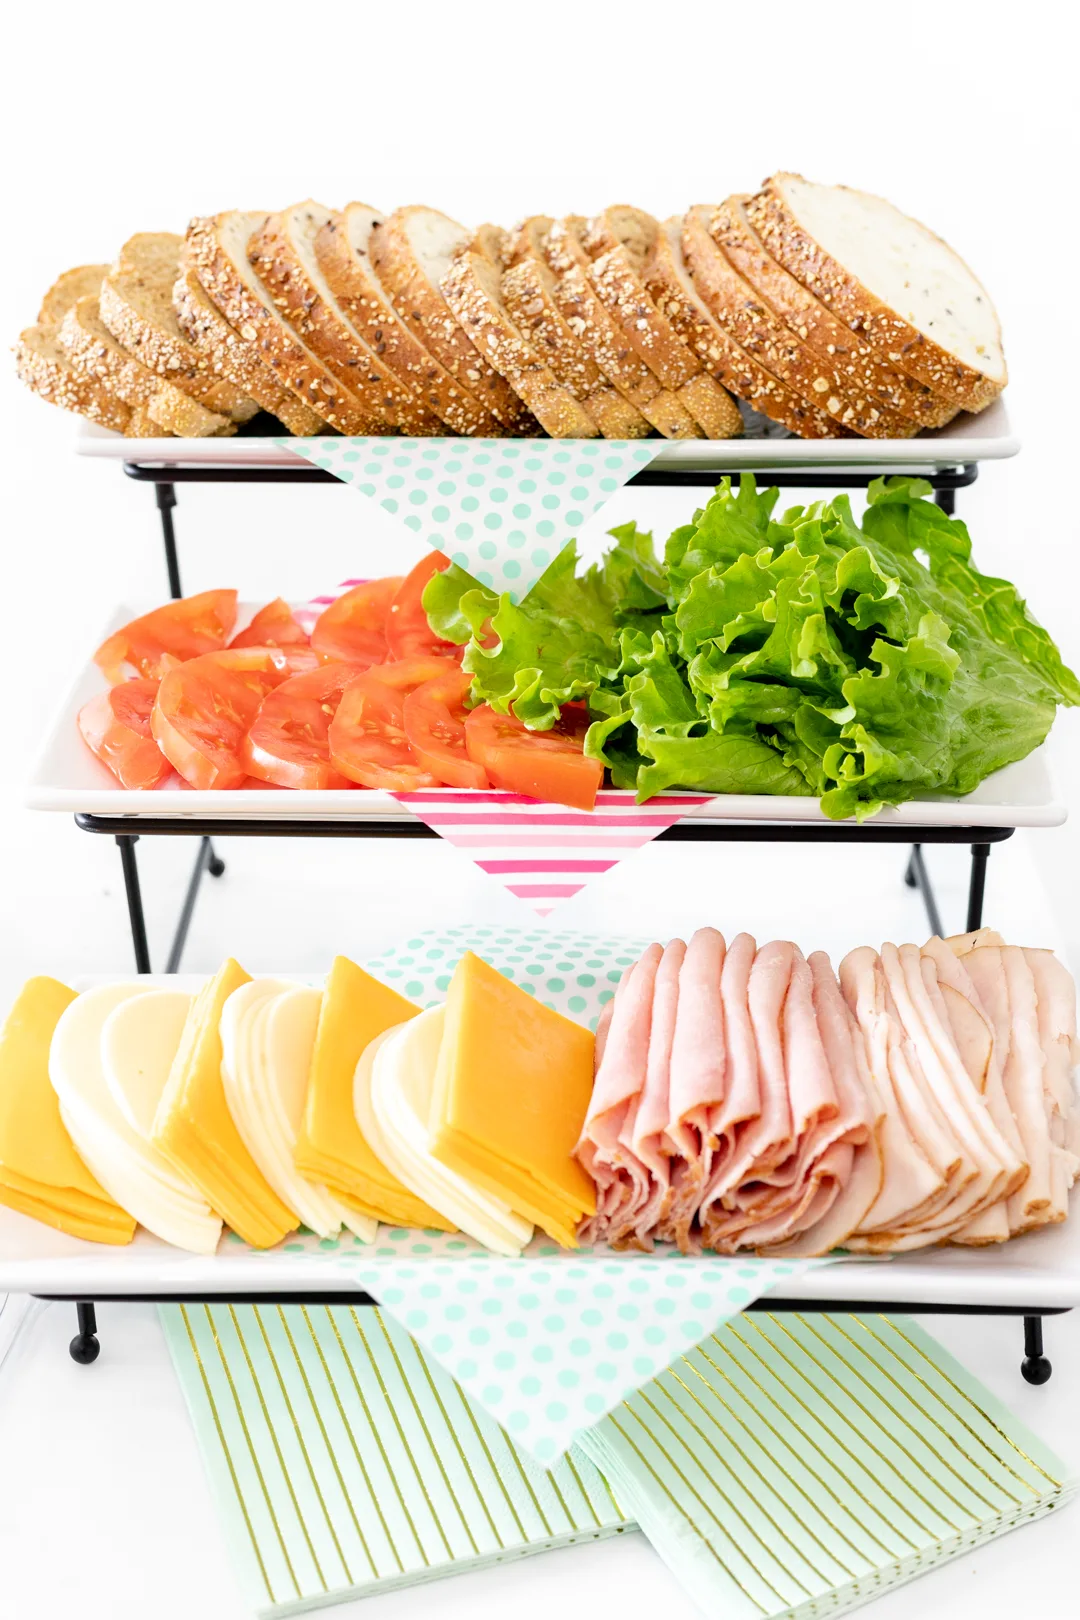 sandwich buffet station with bread, vegetables, cheese and meats.